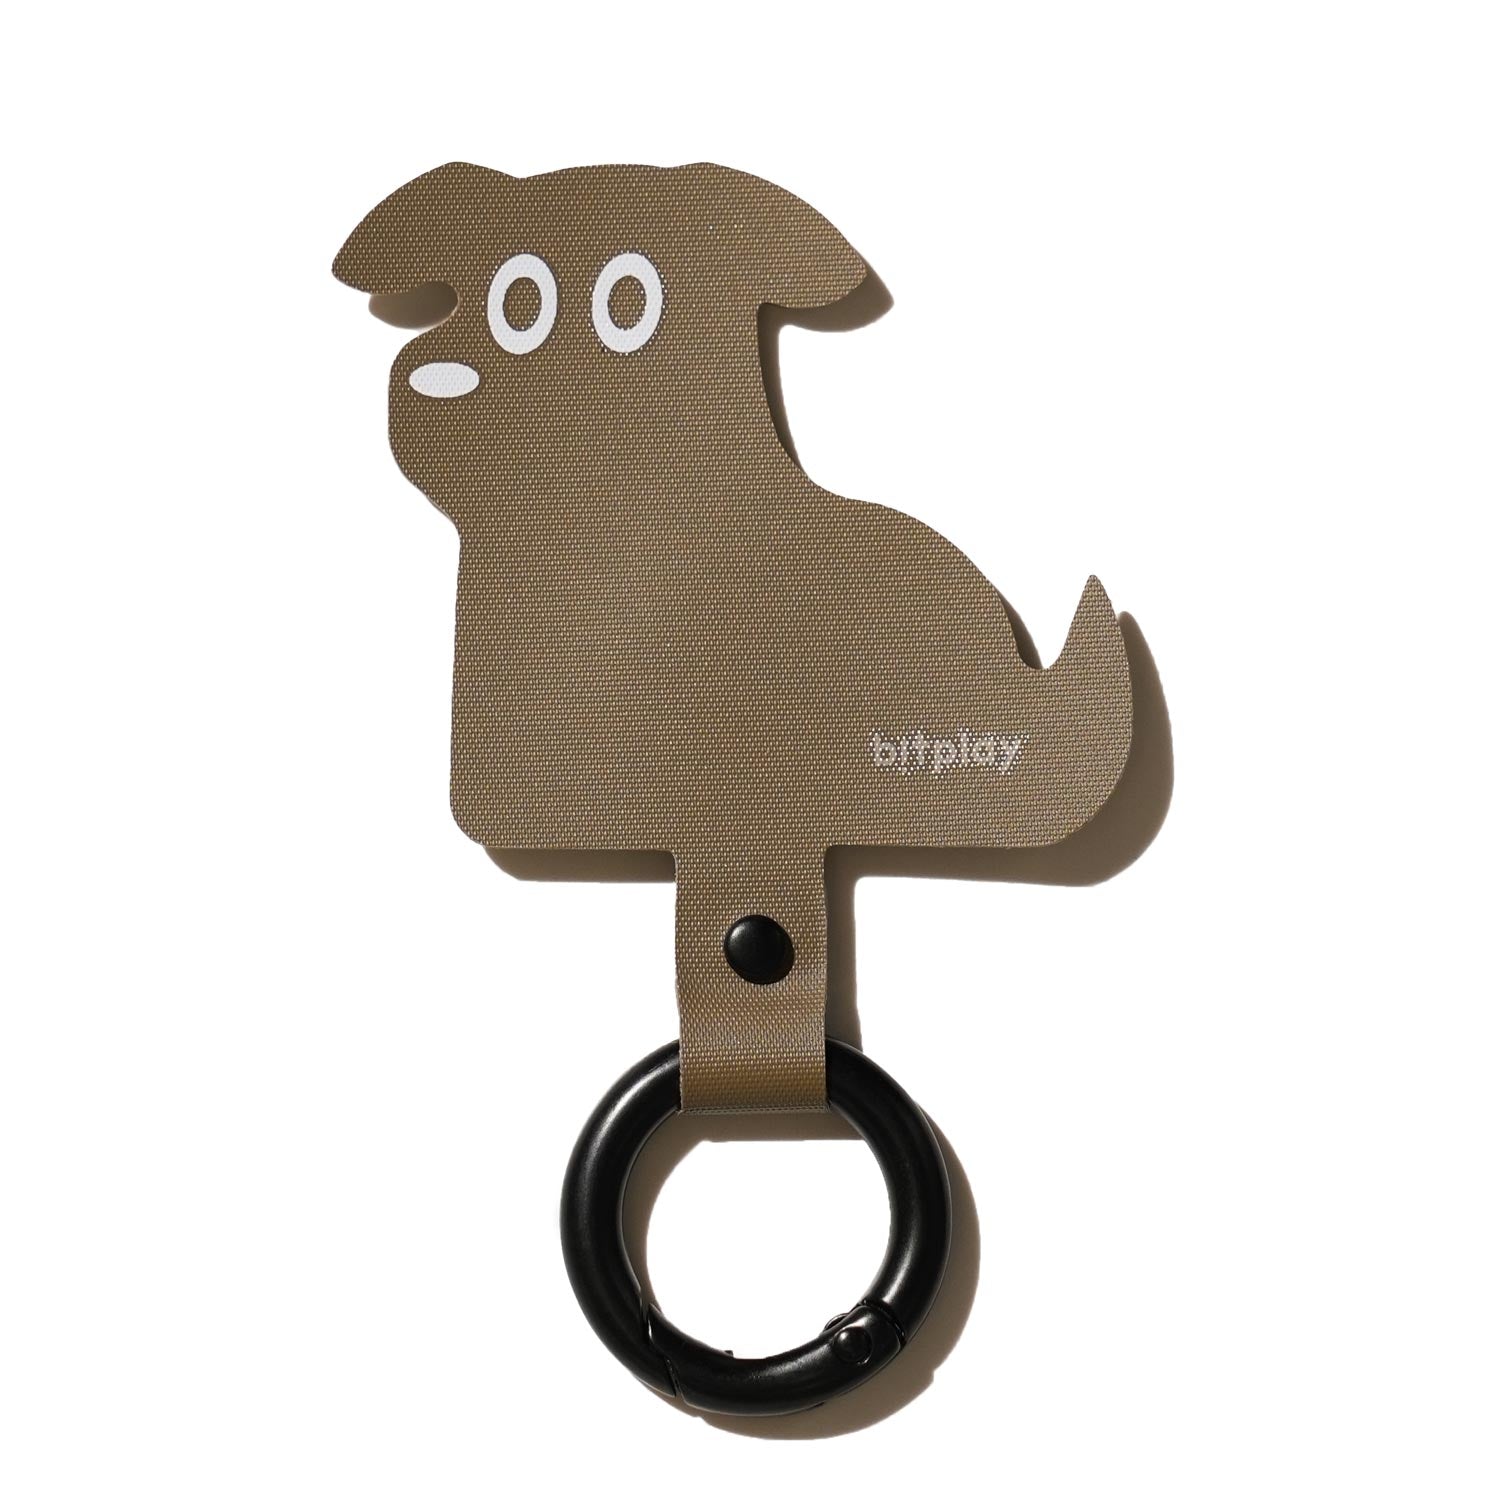 Strap Adapter - Browny Puppy